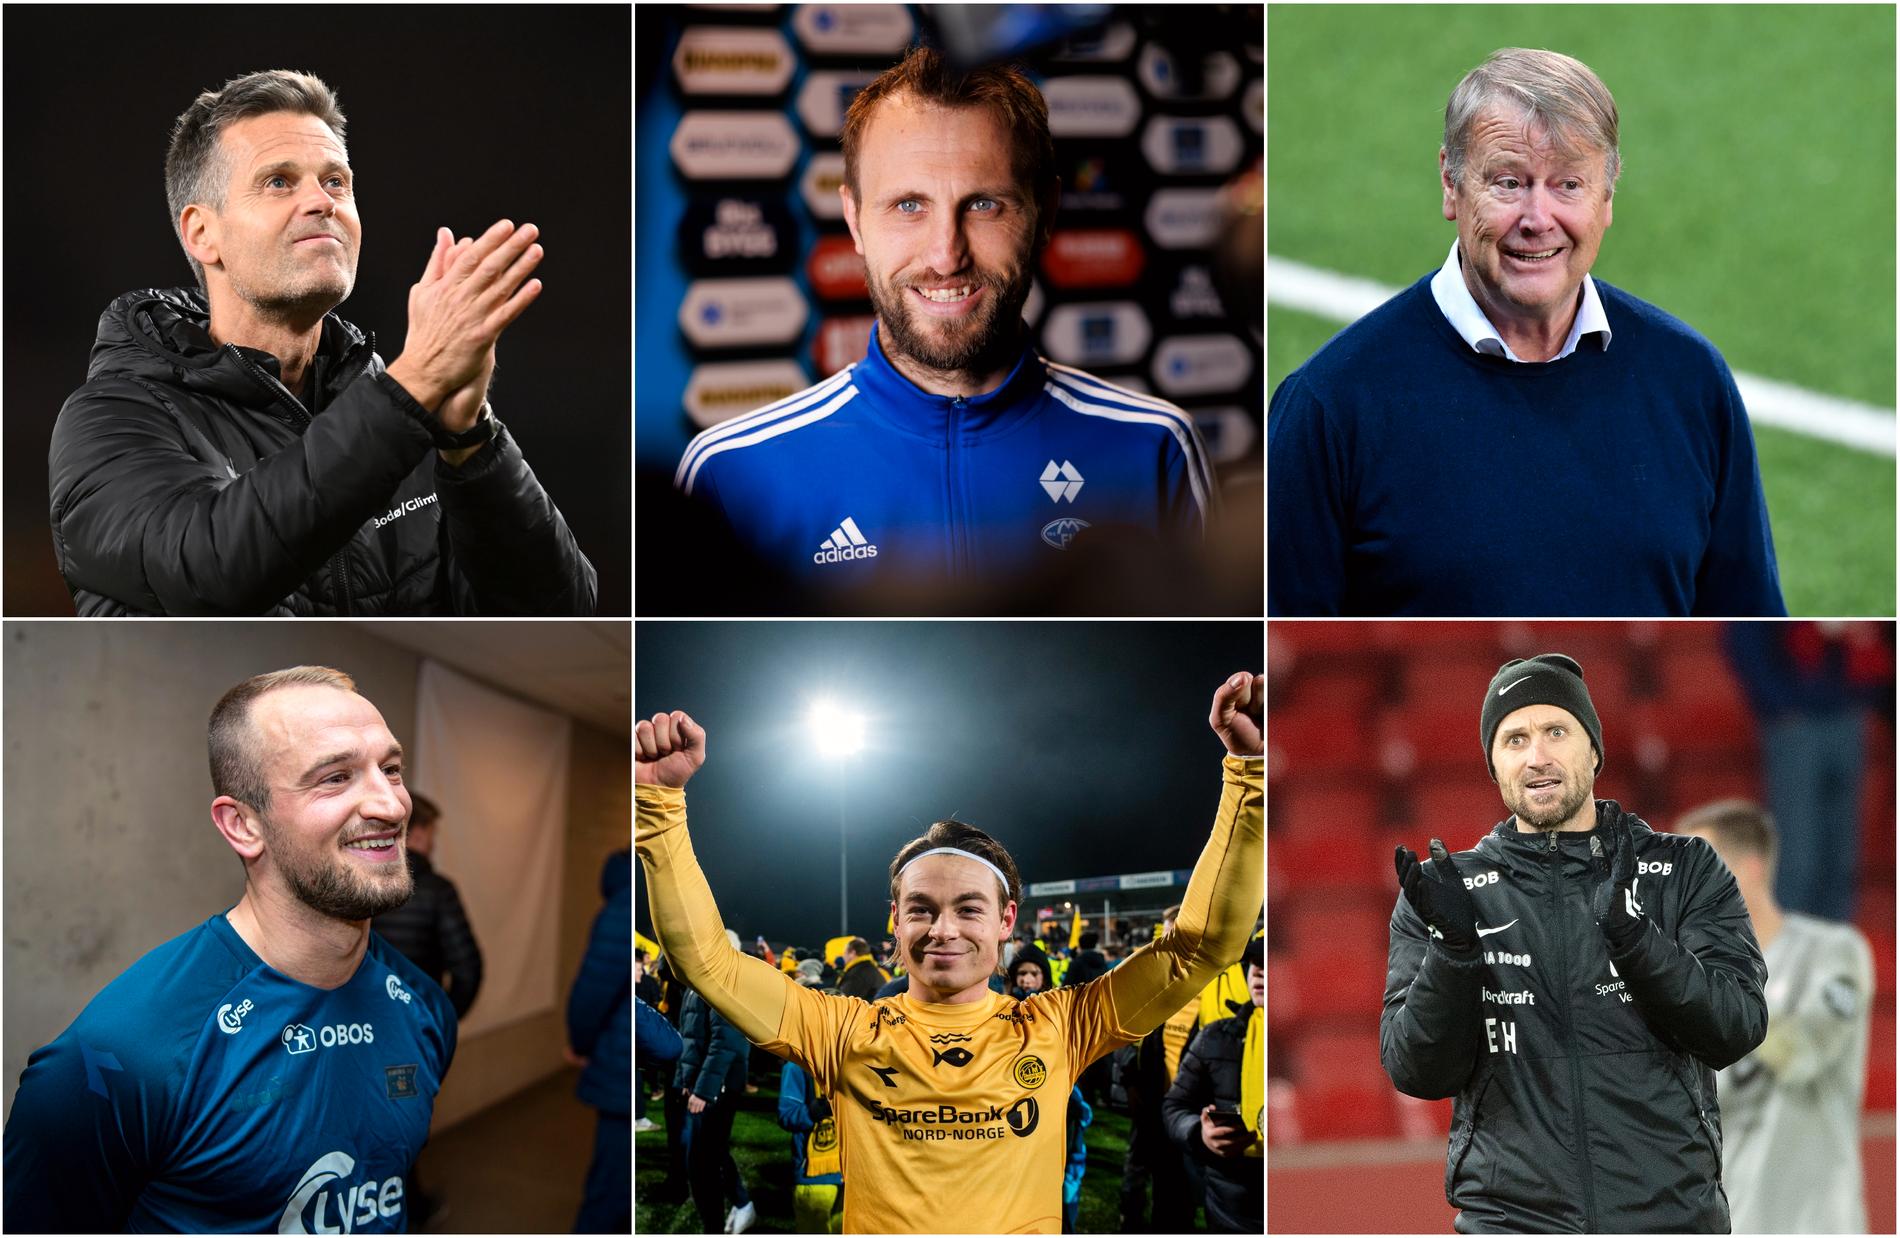 Tax lists 2021: These have got the best at Eliteserien